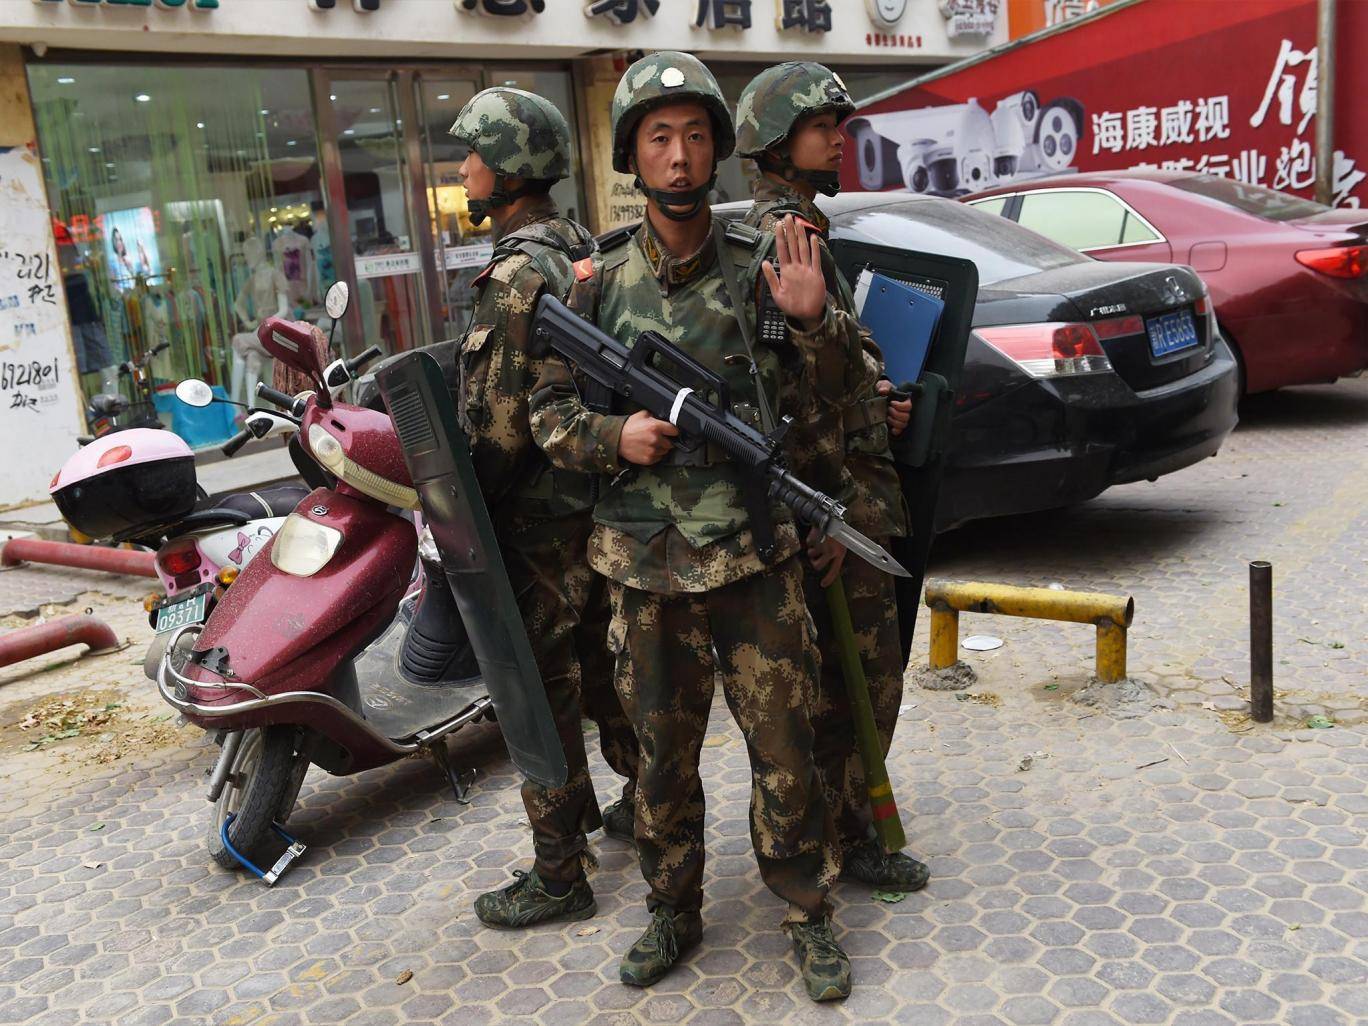 China’s Uighur minority shackled by digital technology as thousands are detained for ‘vocational training’